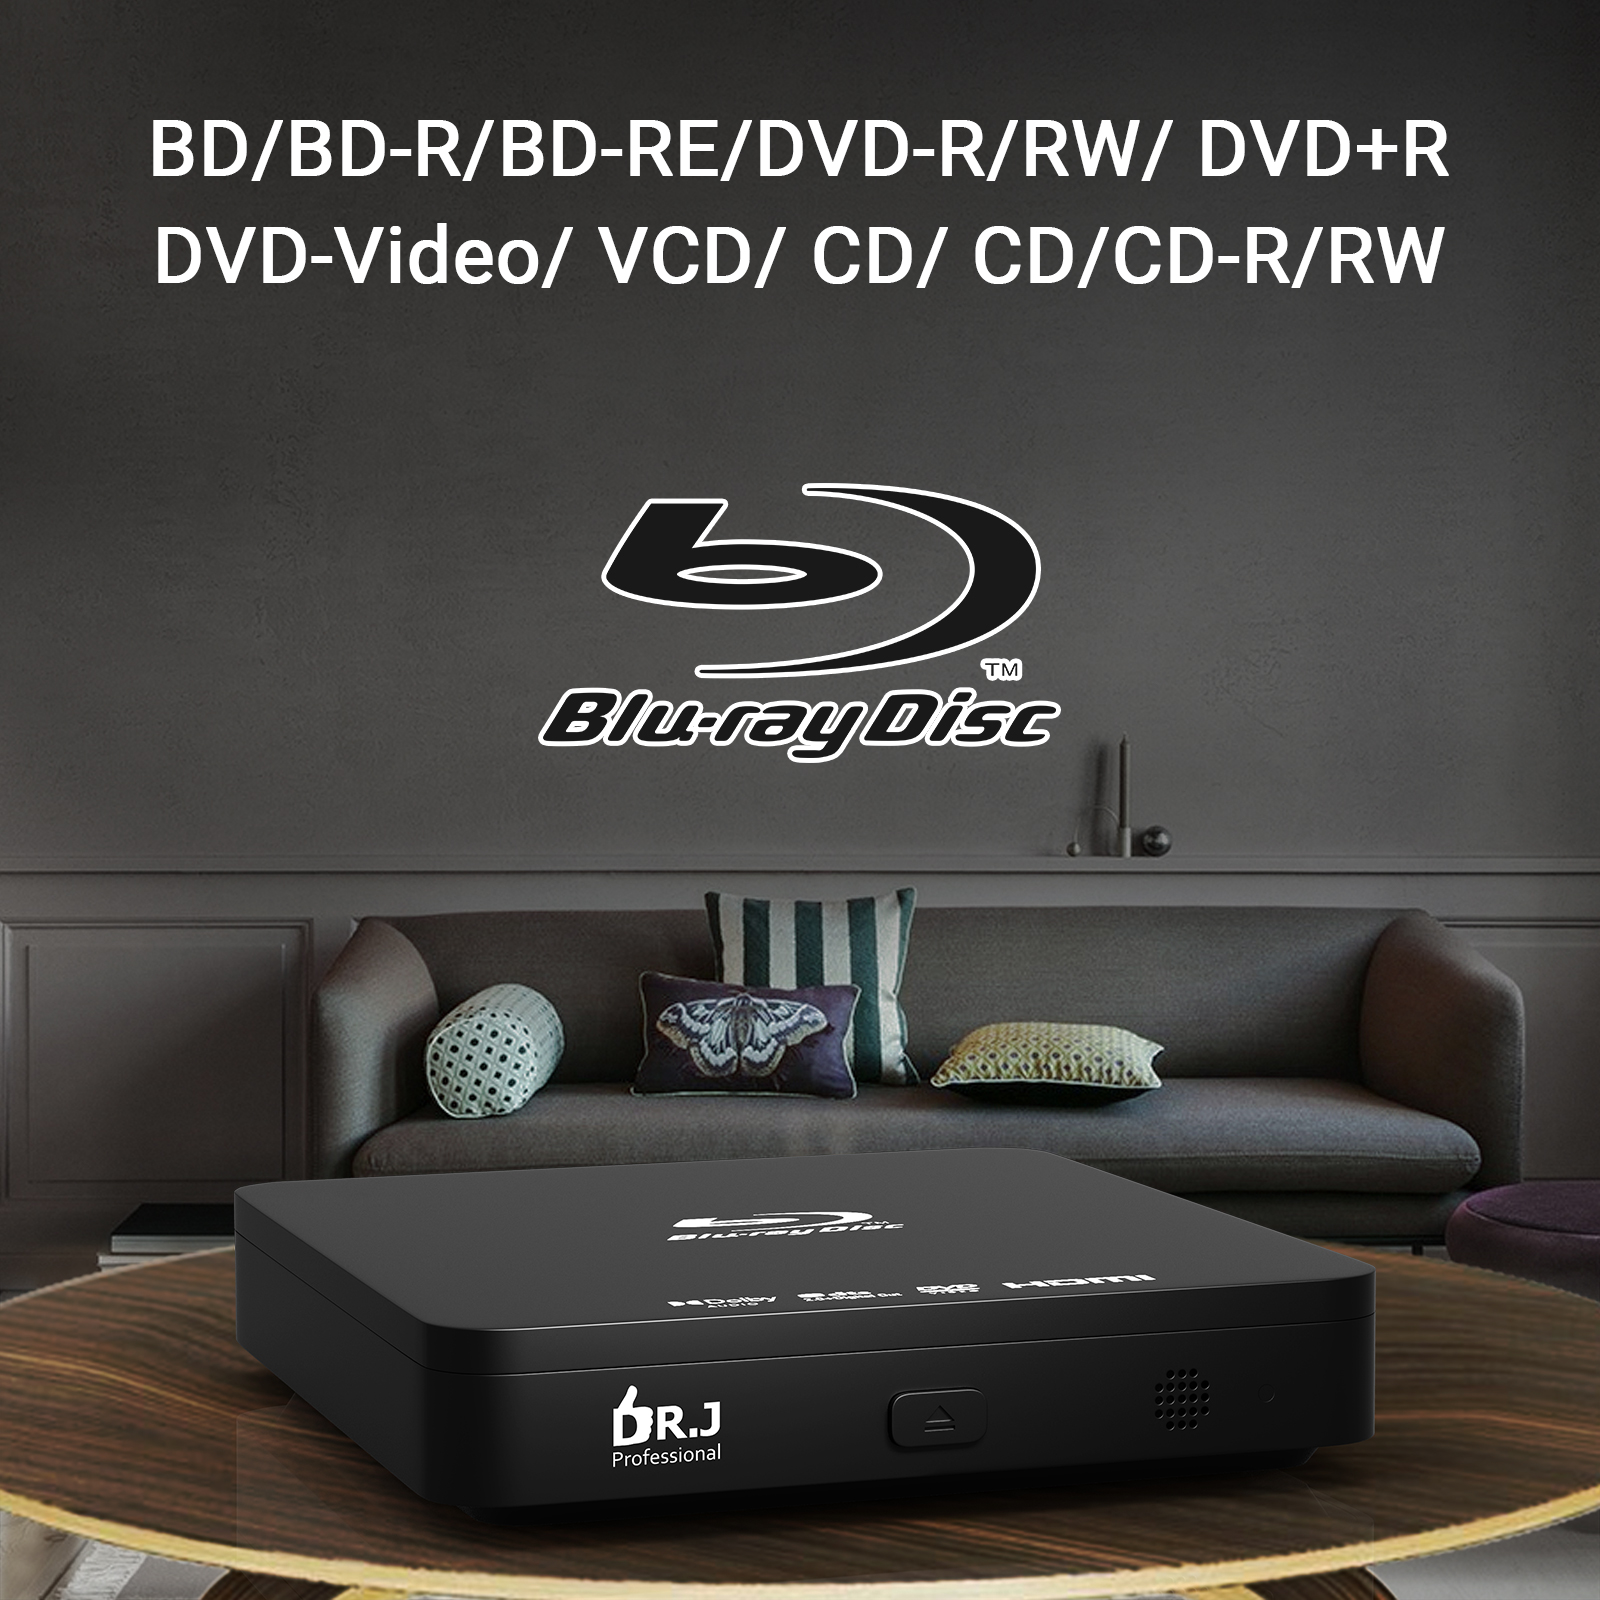 ray　1080P　Blue-Ray　Ray　Player　with　Portable　Player　Blu　Player　Compact　Blue　TV　Mini　DVD　Disc　Player　HDMI,　for　CD